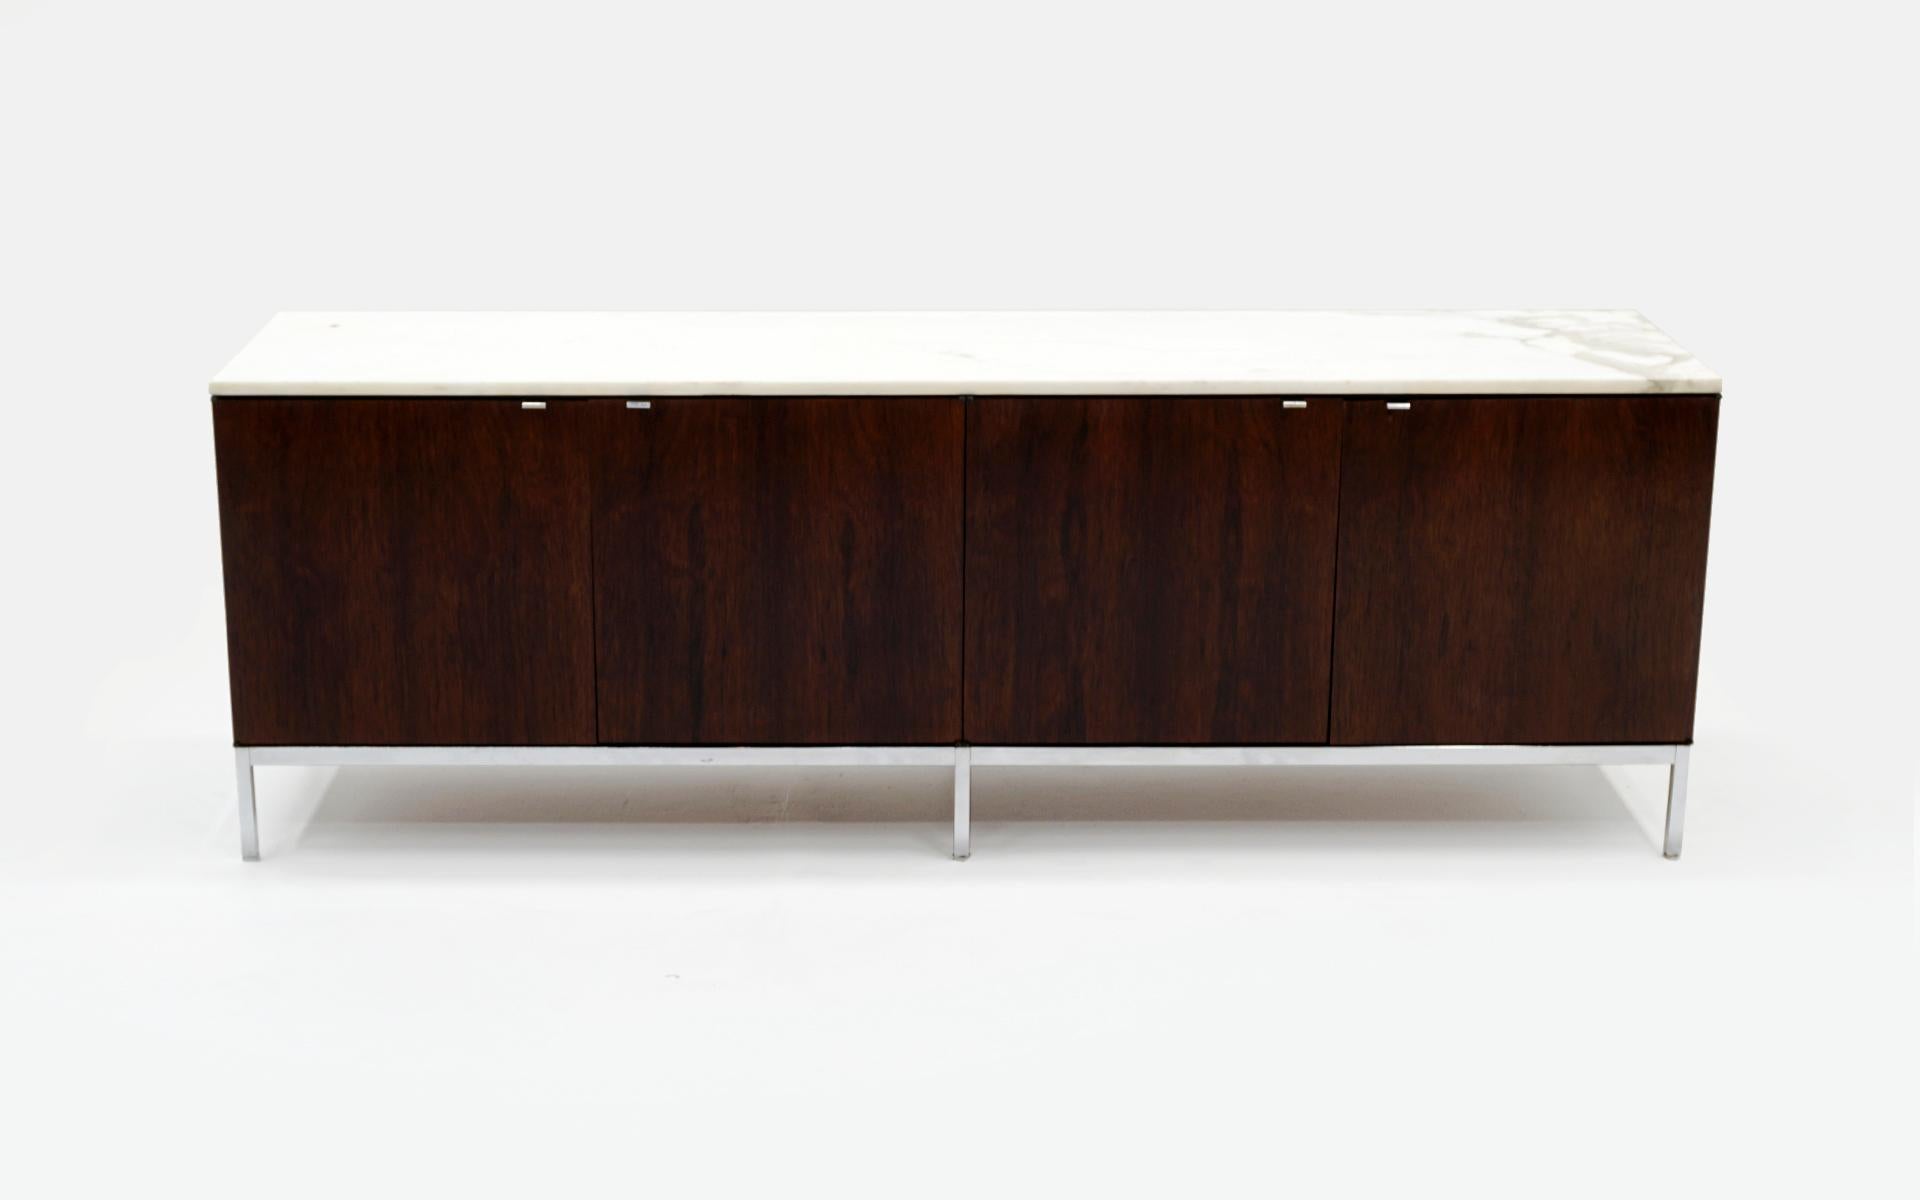 Beautiful Brazilian rosewood credenza / sideboard / storage / media cabinet on chromed steel base. Completely original and in very good condition, ready to use. The Calacatta marble (more rare and expensive than Carrara marble) is white with gray